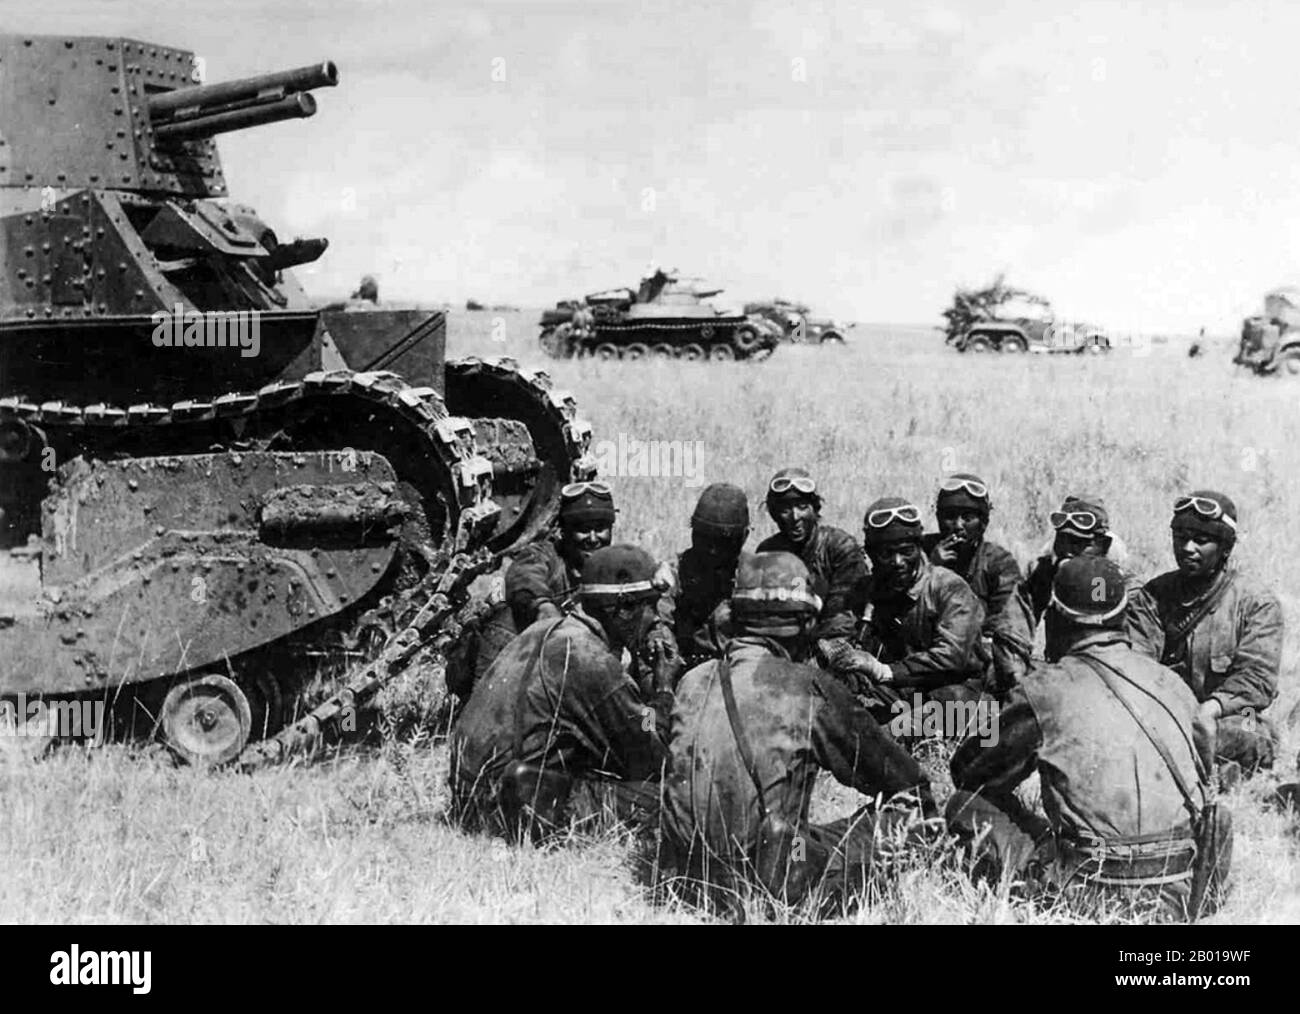 Mongolia: Japanese crew of a Type 89 'Yi-Go' tank conferring at Khalkhin Gol, 1939.  The Battles of Khalkhin Gol were the decisive engagements of the undeclared Soviet-Japanese Border War fought between the Soviet Union, Mongolia and Japan in 1939. They were named after the river Khalkhin Gol, which passes through the battlefield. In Japan, the decisive battle of the conflict is known as the Nomonhan Incident (Nomonhan Jiken) after a nearby village, and was a total defeat for their army. Stock Photo